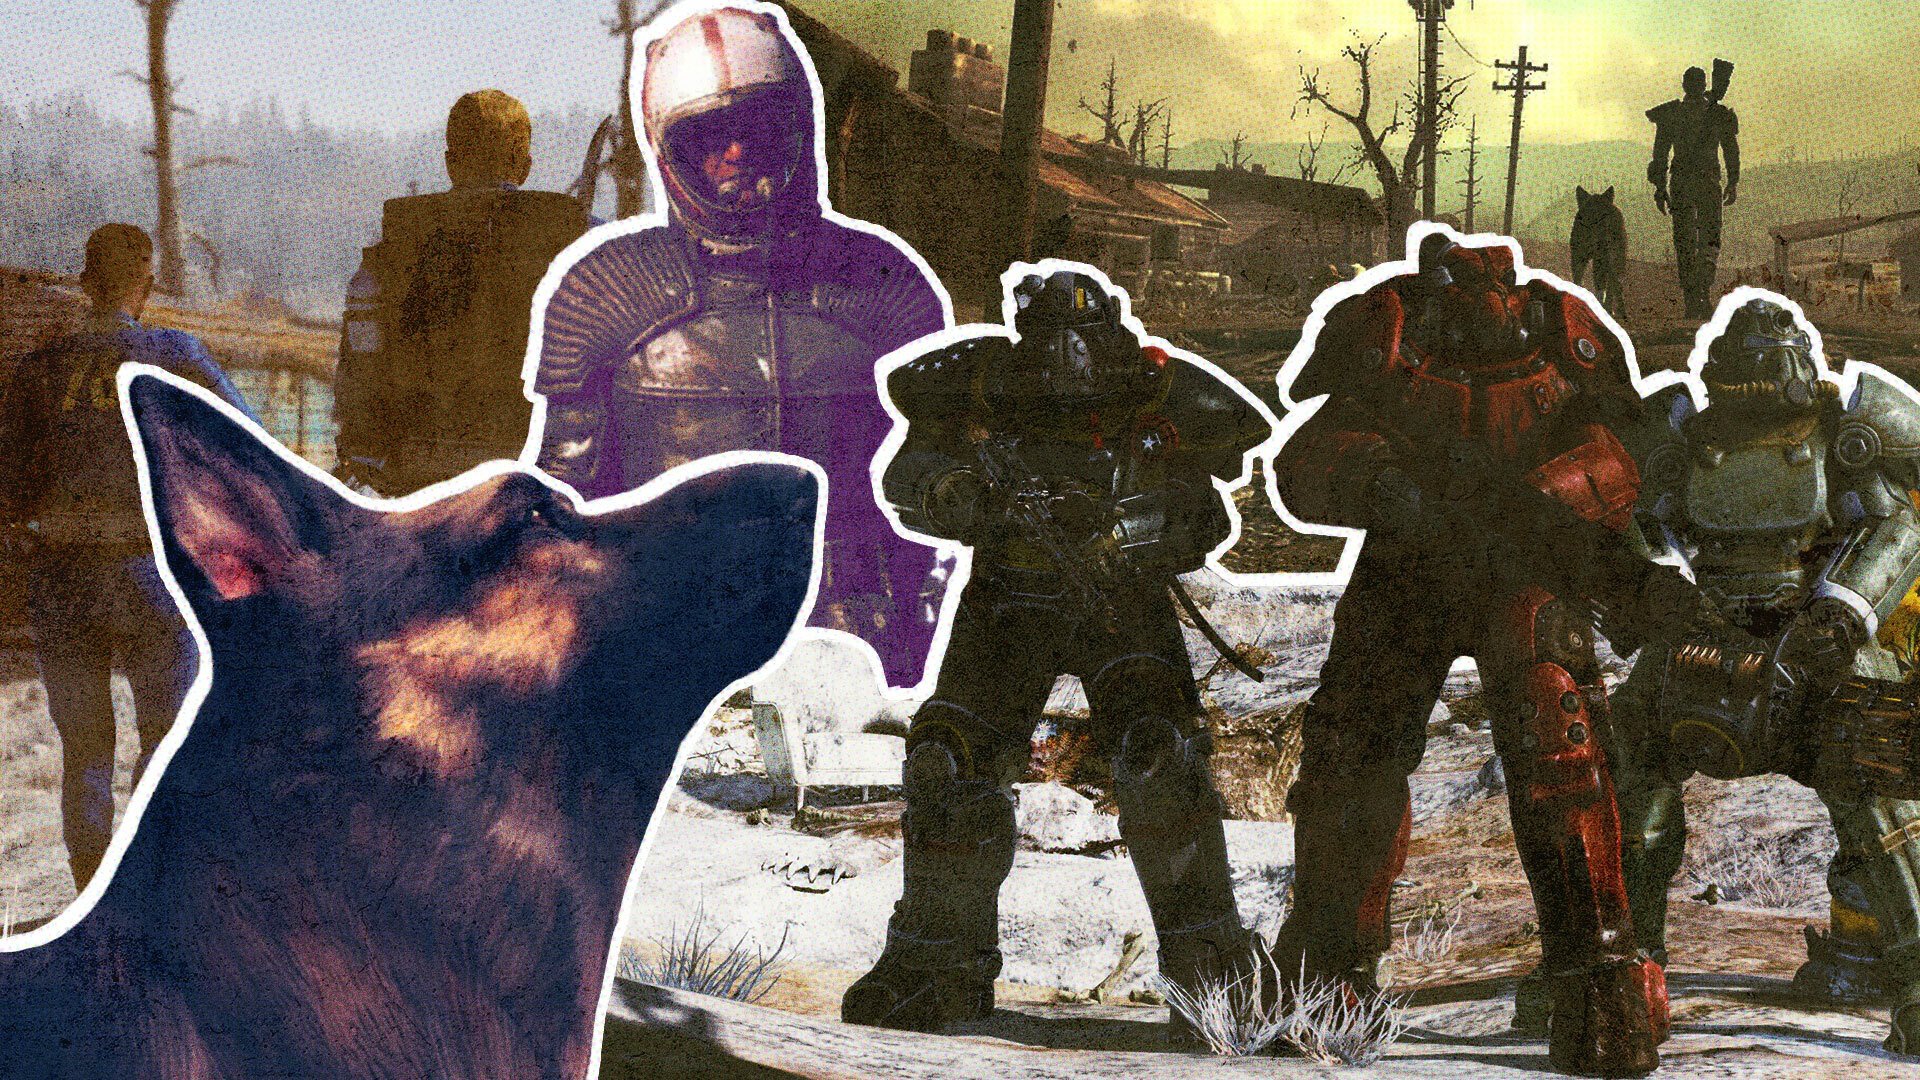 A collage image featuring characters and a dog from the video game 